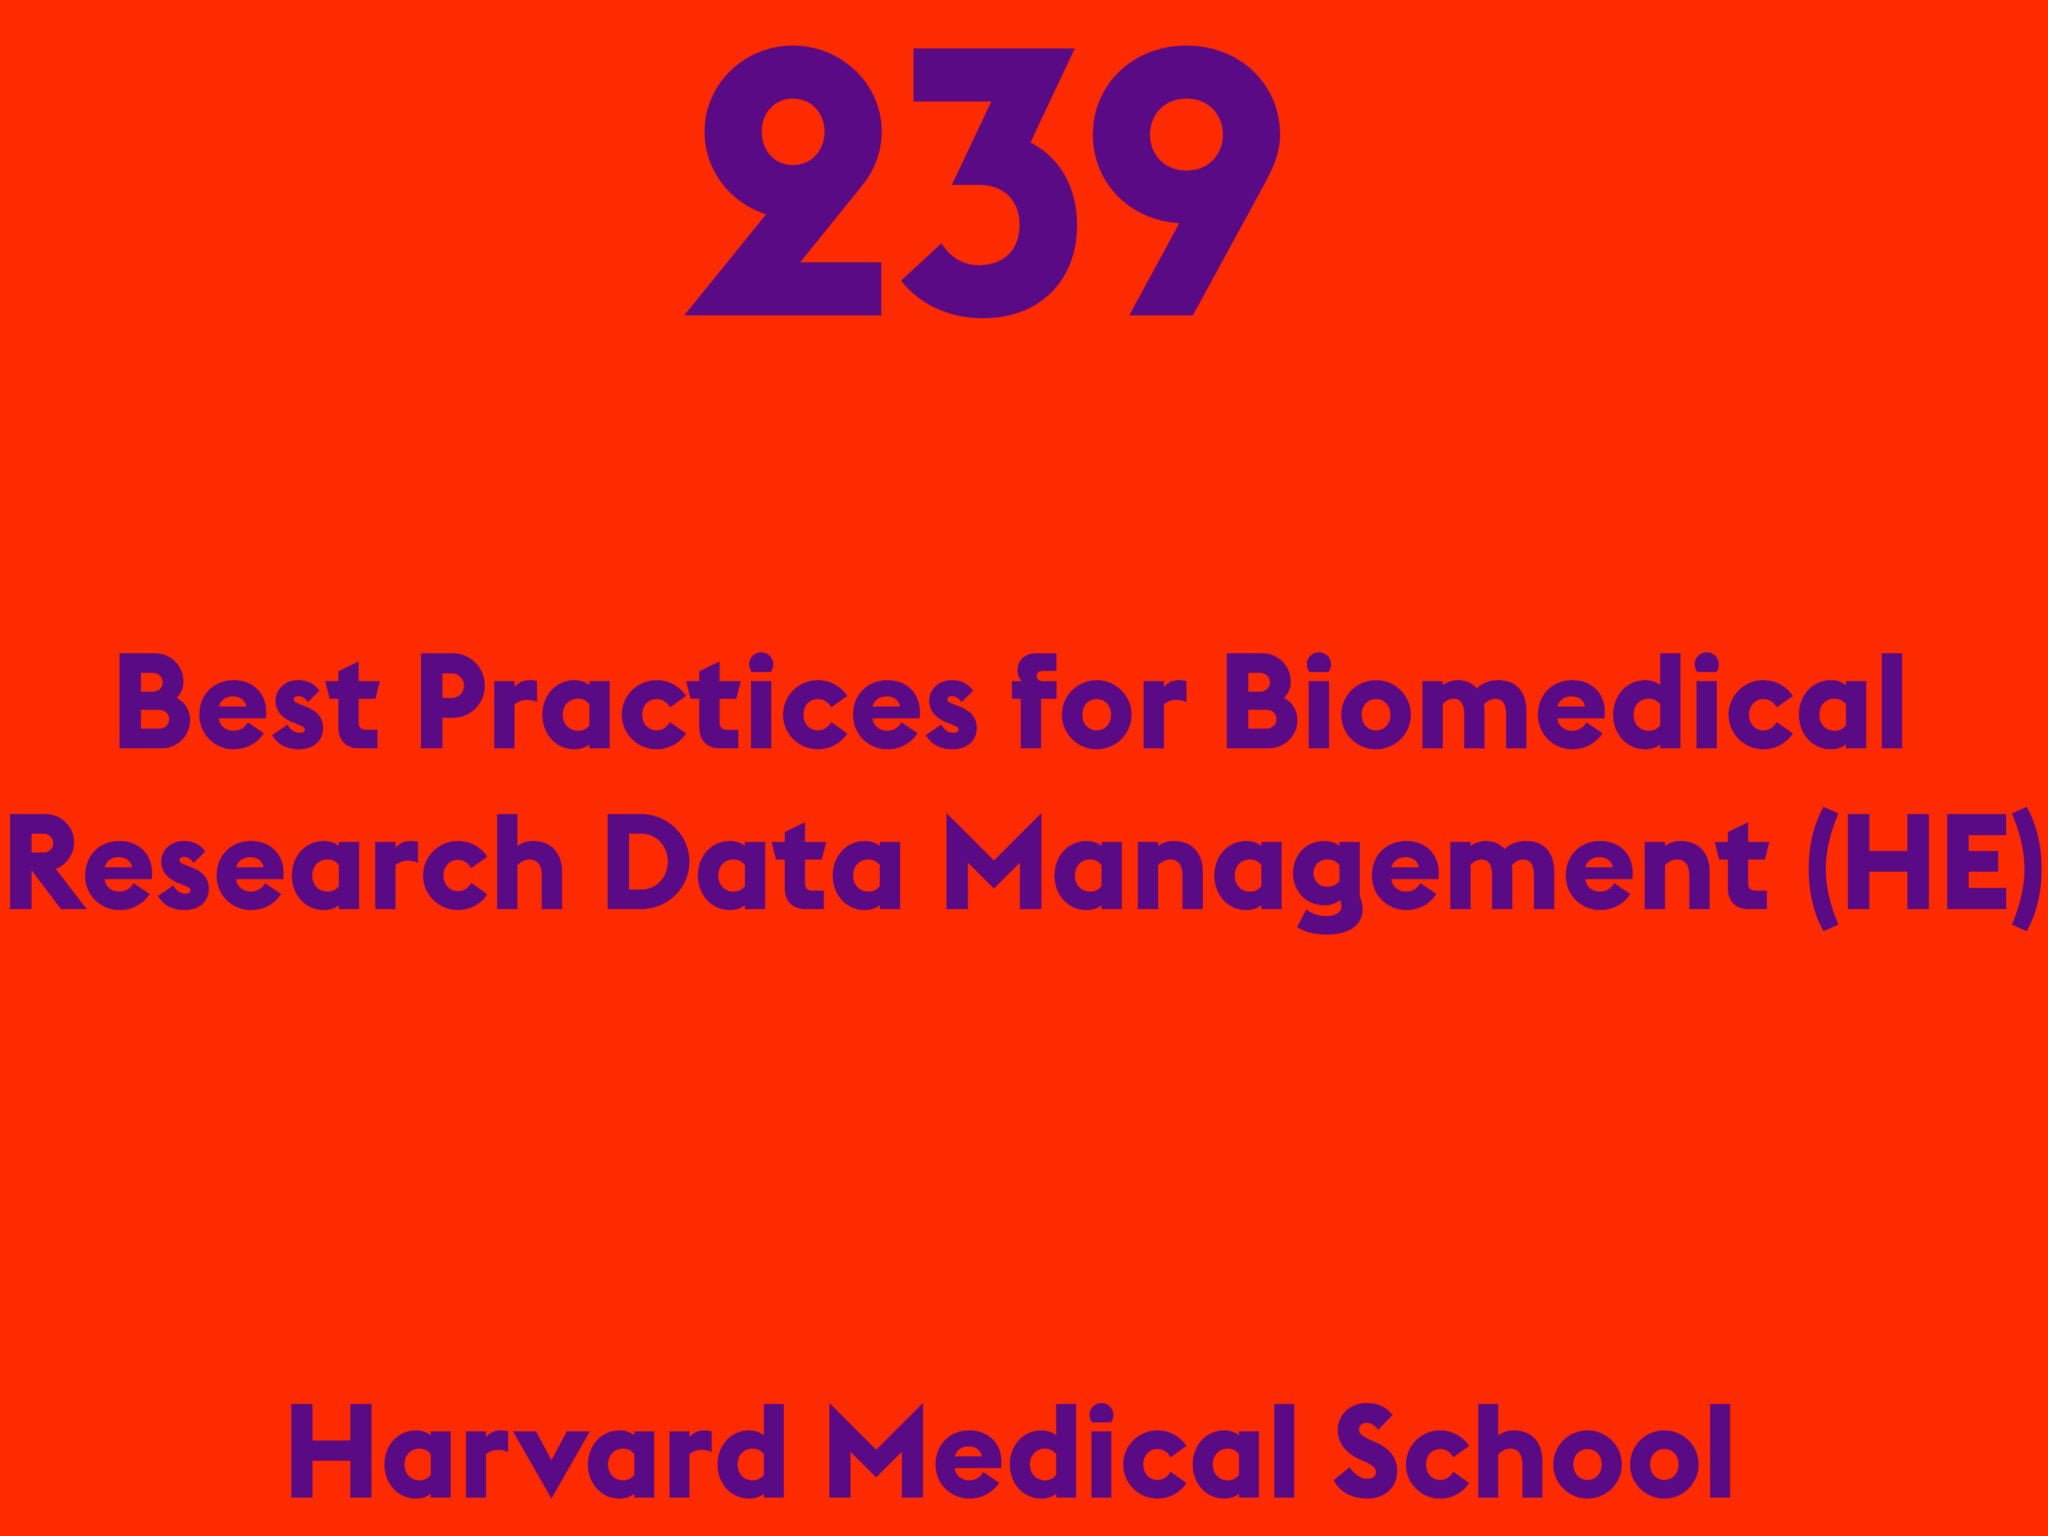 Best Practices for Biomedical Research Data Management (HE)